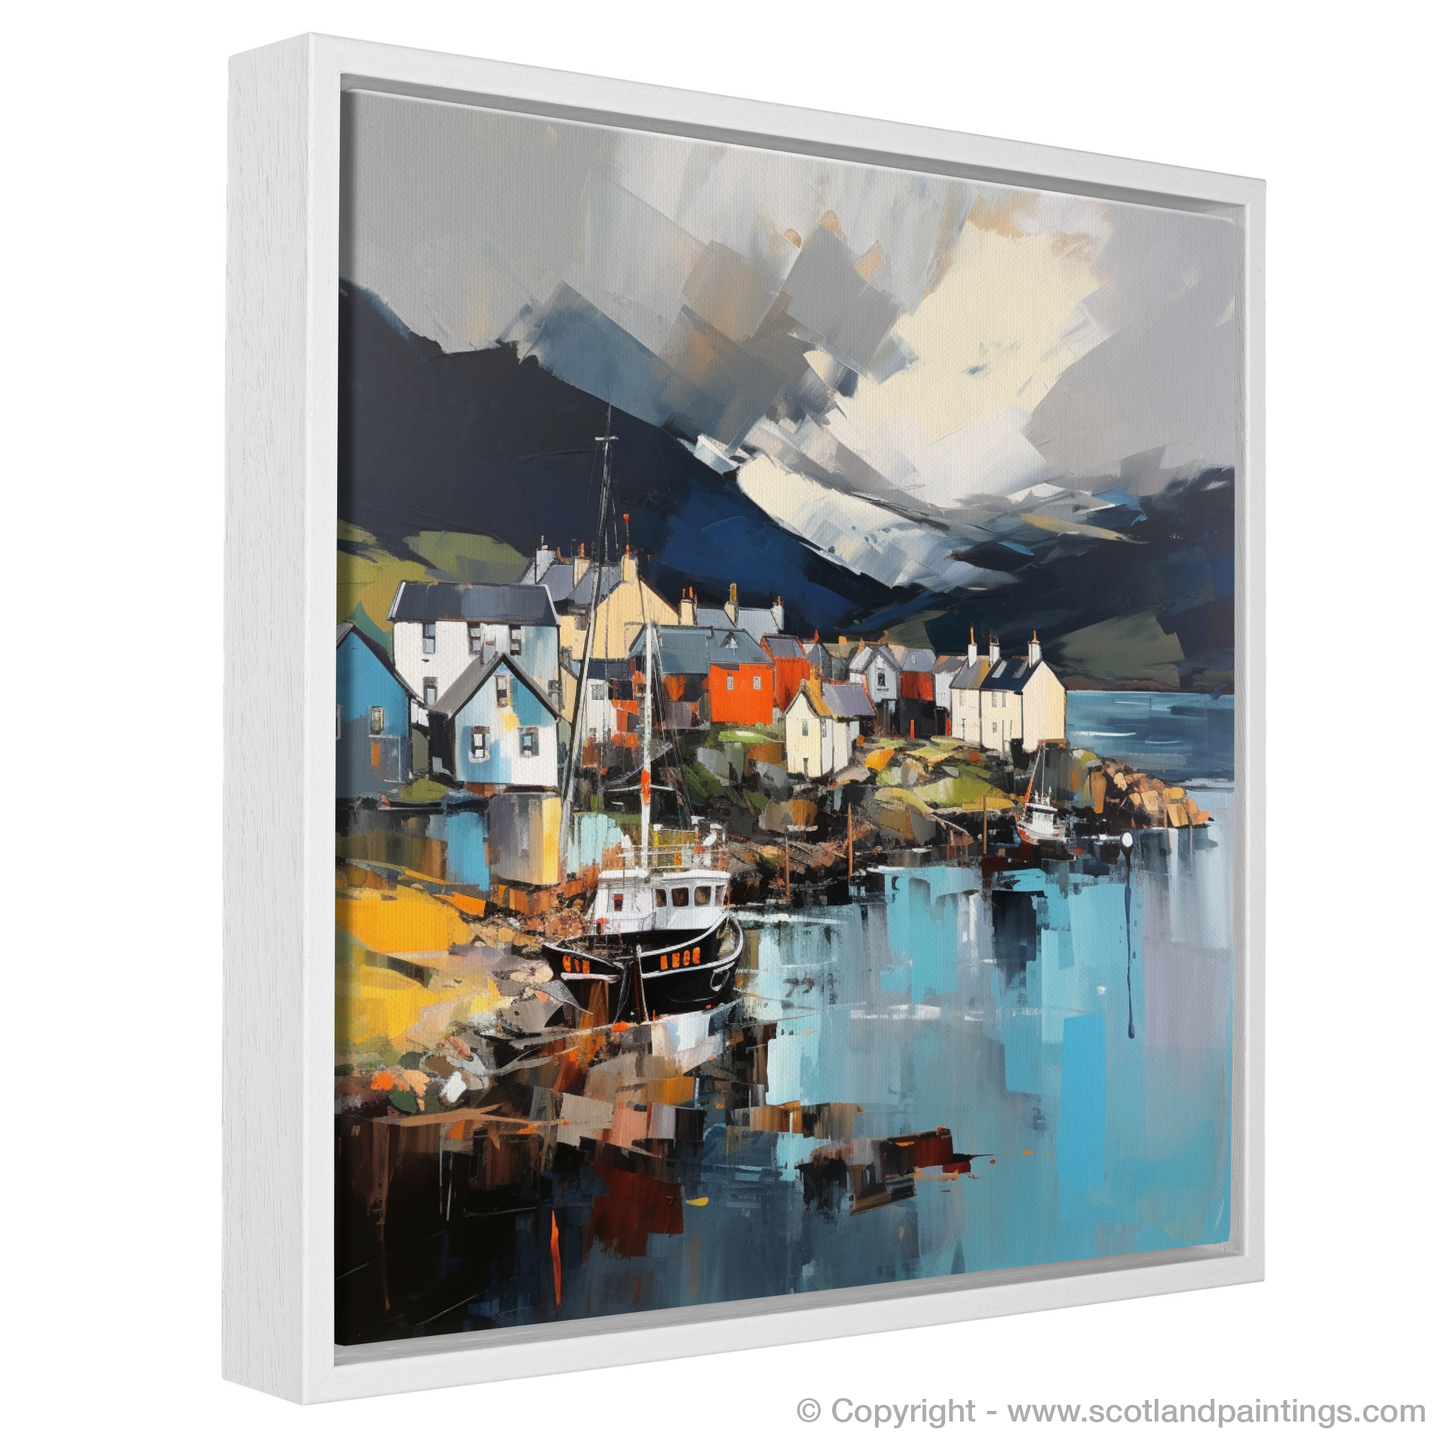 Painting and Art Print of Mallaig Harbour with a stormy sky entitled "Storm over Mallaig Harbour: An Expressionist Ode to Scottish Seascapes".